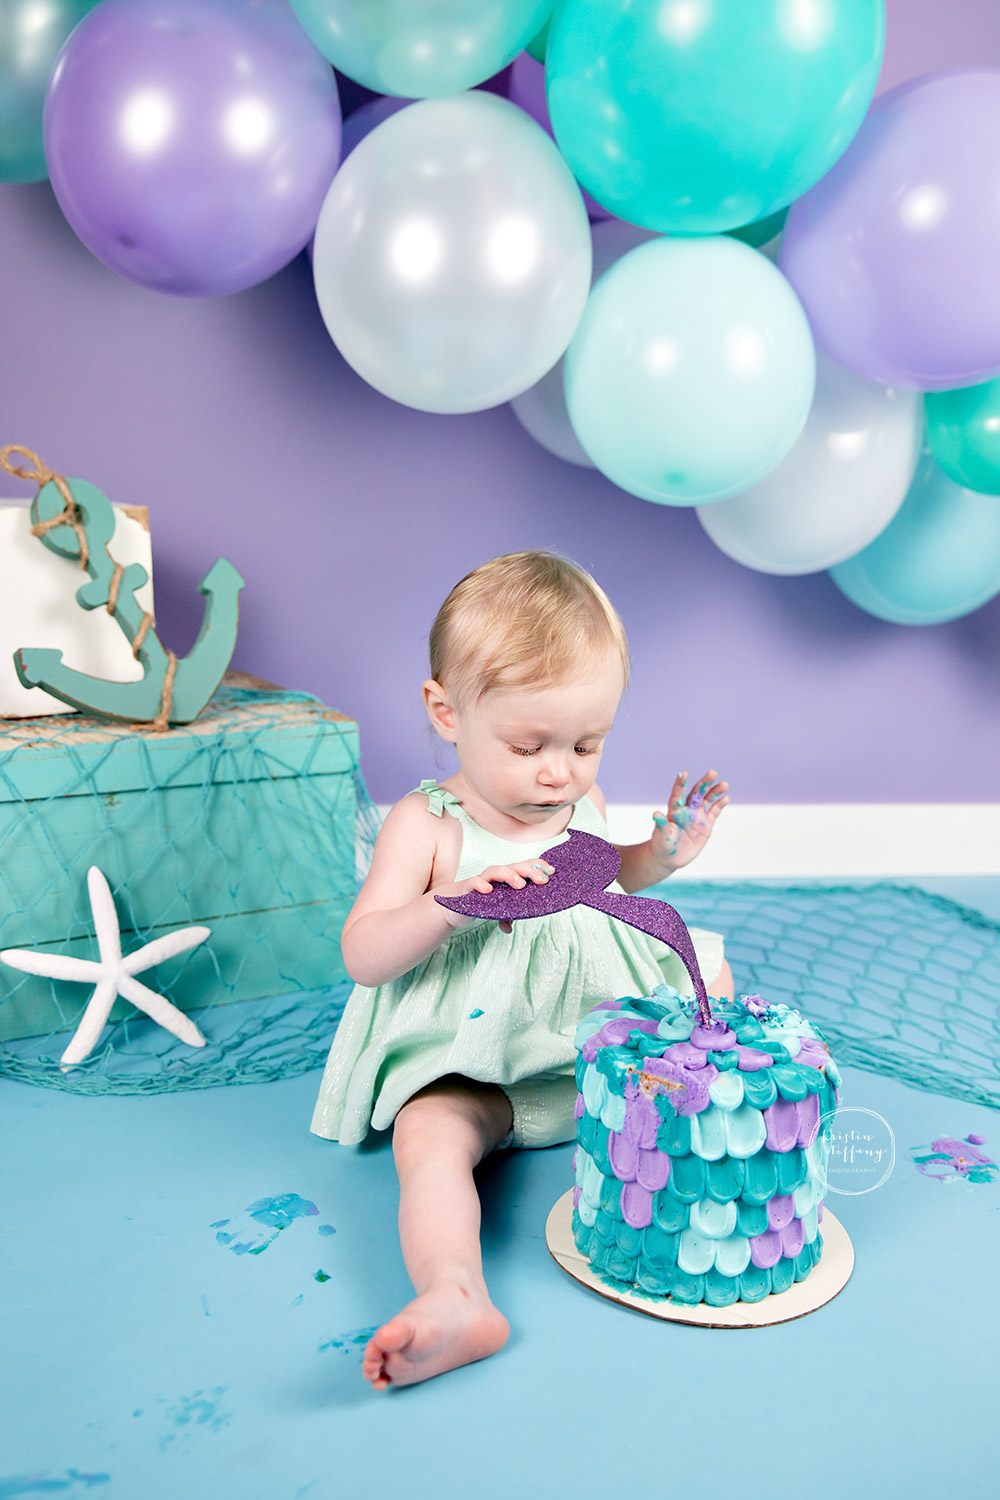 a photo of a baby girl at a cake smash session with Kristin Tiffany Photography